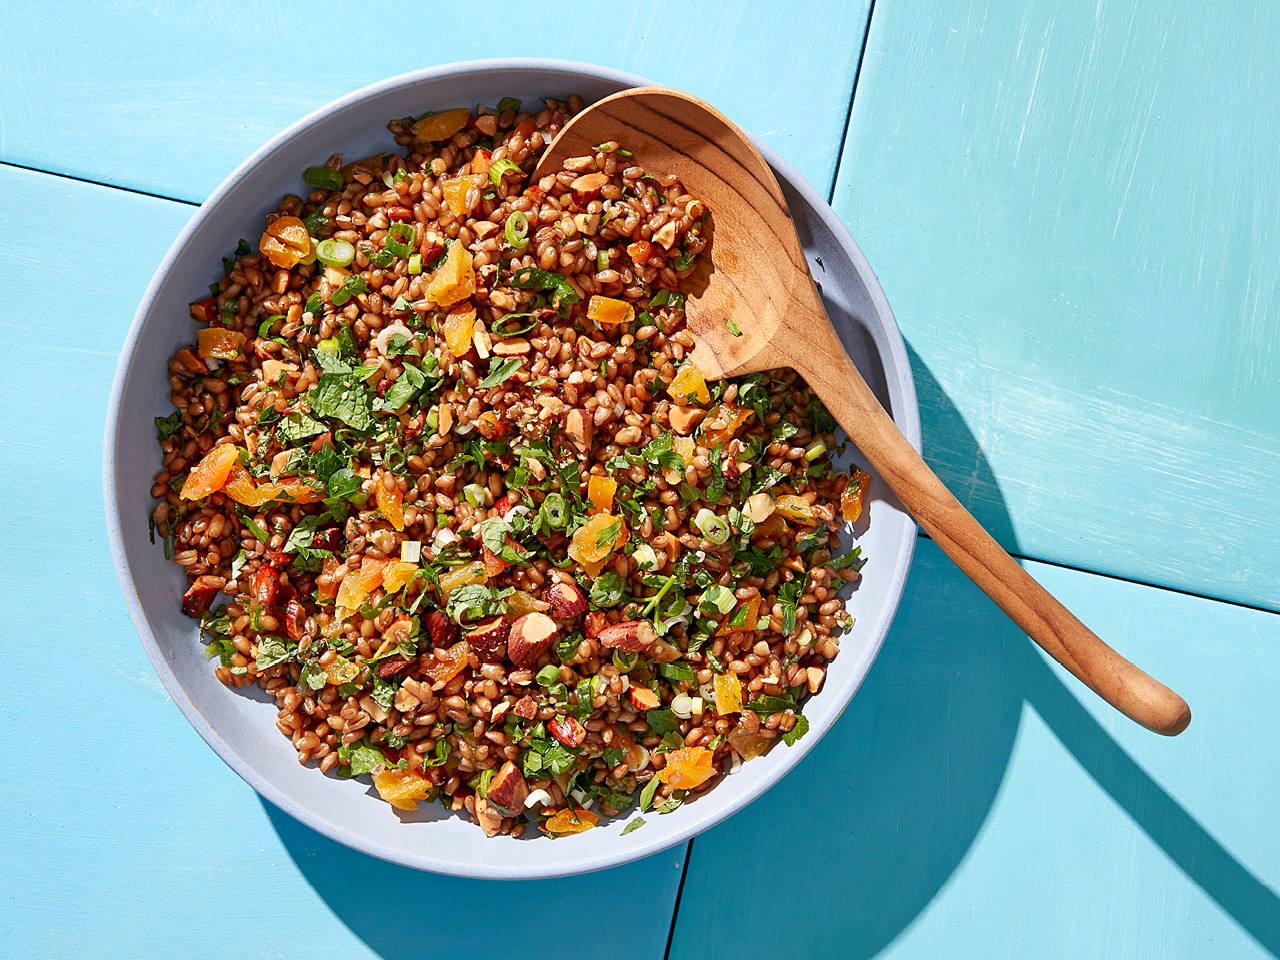 Herbed wheat berry salad with apricots and almonds in a blue bowl on a blue table with a wooden spoon resting in the salad